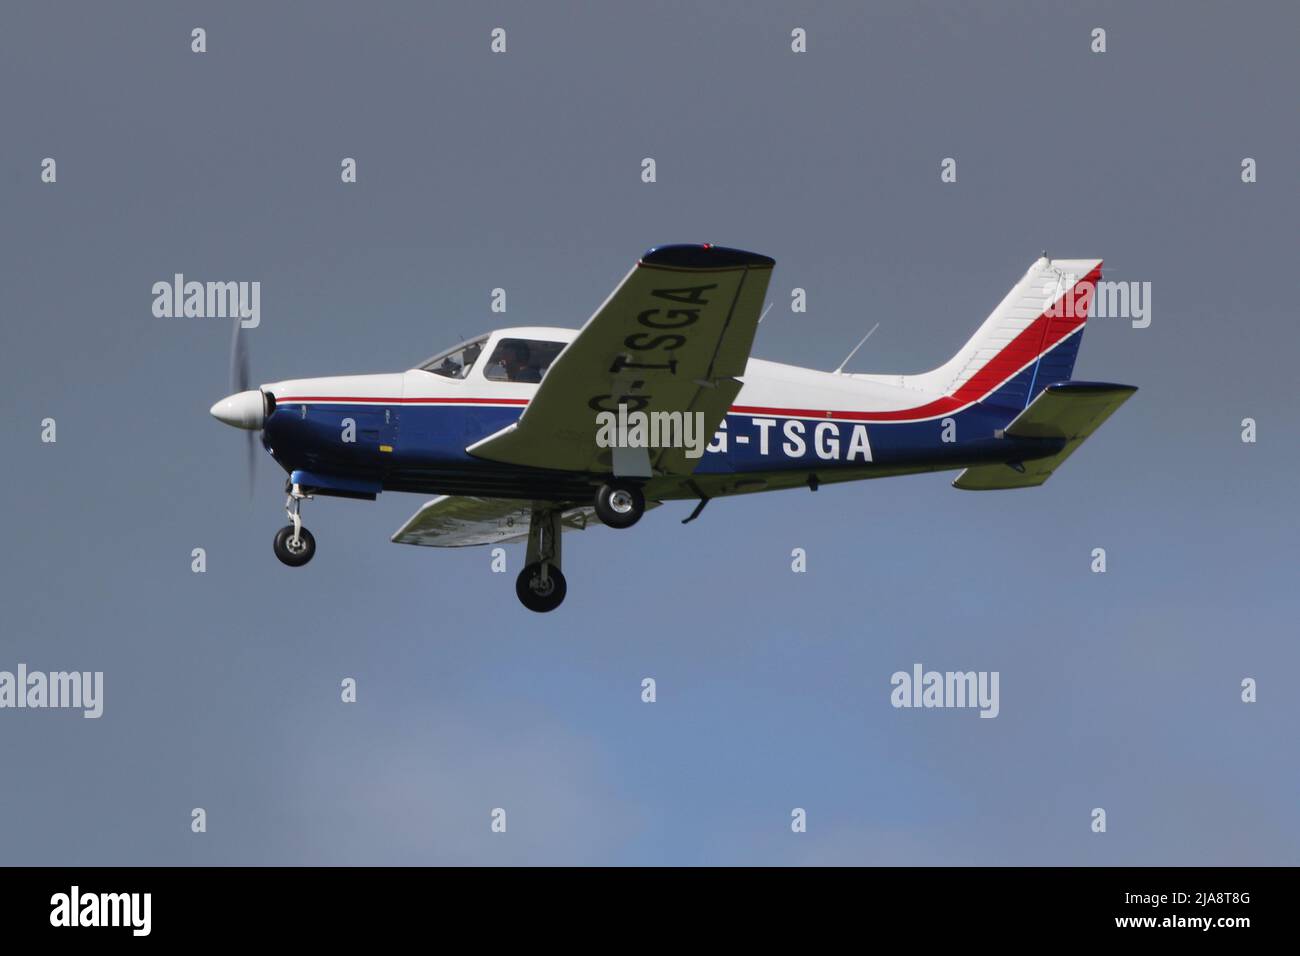 G-TSGA, a privately-owned Piper PA-28R-201 Arrow III, arriving at Prestwick International Airport in Ayrshire, Scotland. Stock Photo